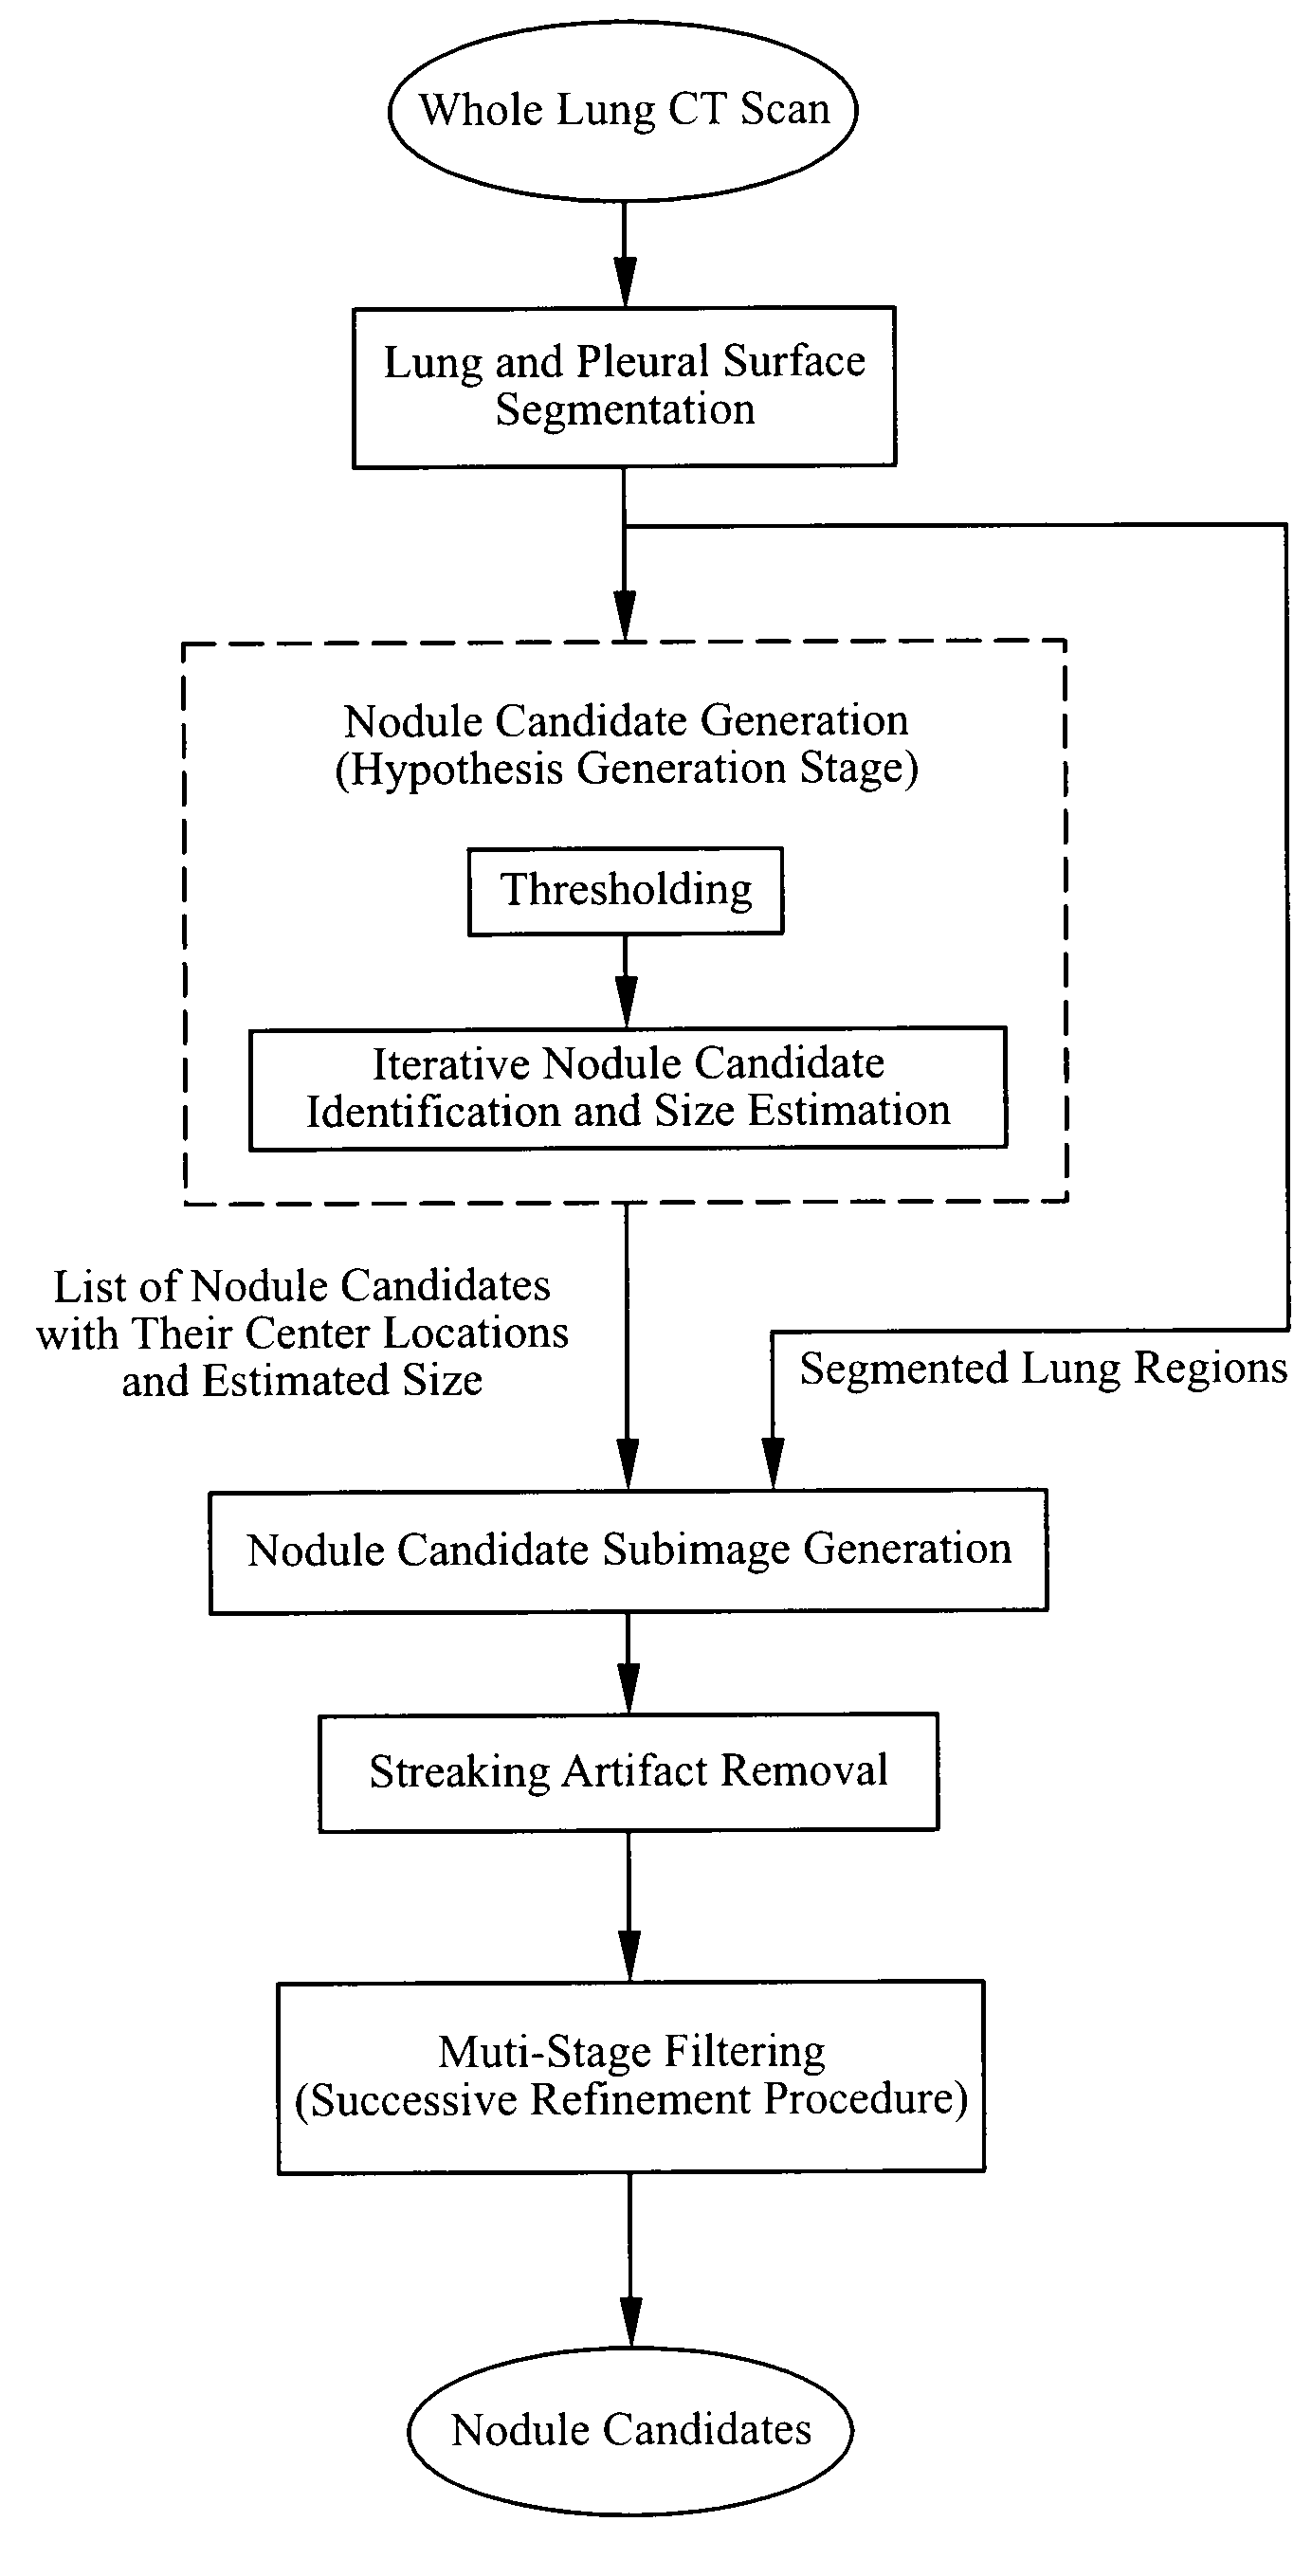 System, Method and Apparatus for Small Pulmonary Nodule Computer Aided Diagnosis from Computed Tomography Scans